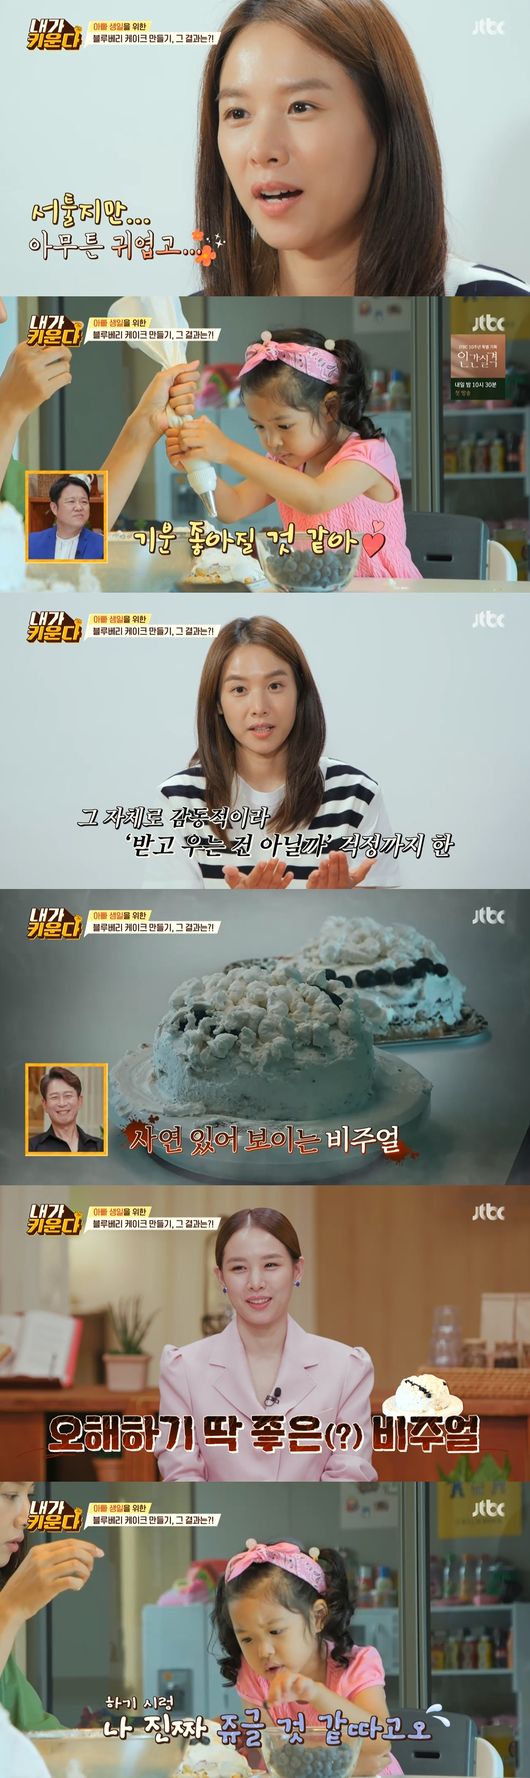 Jo Yoon-hee told the story of her ex-Husband Lee Dong-gun.On JTBC I Raise broadcasted on the 3rd, Jo Yoon-hee was shown preparing a birthday Cake for her ex-Husband Lee Dong-gun with her daughter Roa.On this day, Jo Yoon-hee made a birthday Cake of Dong-gun with blueberries and handmade cream made with his daughter Roa.Jo Yoon-hee said, I am taking good care of my familys birthday, but Roa had the idea that she should live away from her father and take better care of her.Jo Yoon-hee said, I have never made Roah uncomfortable with my Father. I ask him what he will do before meeting my Father on the weekend.So it was not a burden to me to make my Fathers birthday Cake. Kim Hyun-sook praised it as a new woman. Jo Yoon-hee tried to make a Cake that he thought was FM, but Roar, who was free, made a completely different visual Cake and made the surroundings.Jo Yoon-hee told Roa, I would be really surprised if my Father said this Cake Roa made it.Roa used blueberries to create caterpillars that attracted attention. She used Jo Yoon-hees power to decorate her cream, but it was overRoarded and she laughed.Jo Yoon-hee said, My expectation is that I will not cry because I am clumsy and cute and I am impressed by the Cake, but if I get it, I think I think the Cake is a little scary.Cho then suggested to her daughter Roa to make her fathers birthday card, which she picked out a sticker made of her own photo and attached to the center of the card.But Roa drew hearts and painted them randomly with colored pencils, drawing laughter.Cho and Roa completed their birthday Cakes and cards at the end of the twists and turns. Cho talked to Lee and Lee.Jo Yoon-hee said, I was informed that I was grateful for making the Cake. My Father seems to have been a memory to be remembered for the first time because it was my first birthday celebration.Yang Jae-jin said, I talk to a divorced family, but do not swear at each other and tell them not to take their mother or father from their child. So it is a good idea for Jo Yoon-hee to make a Cake. 